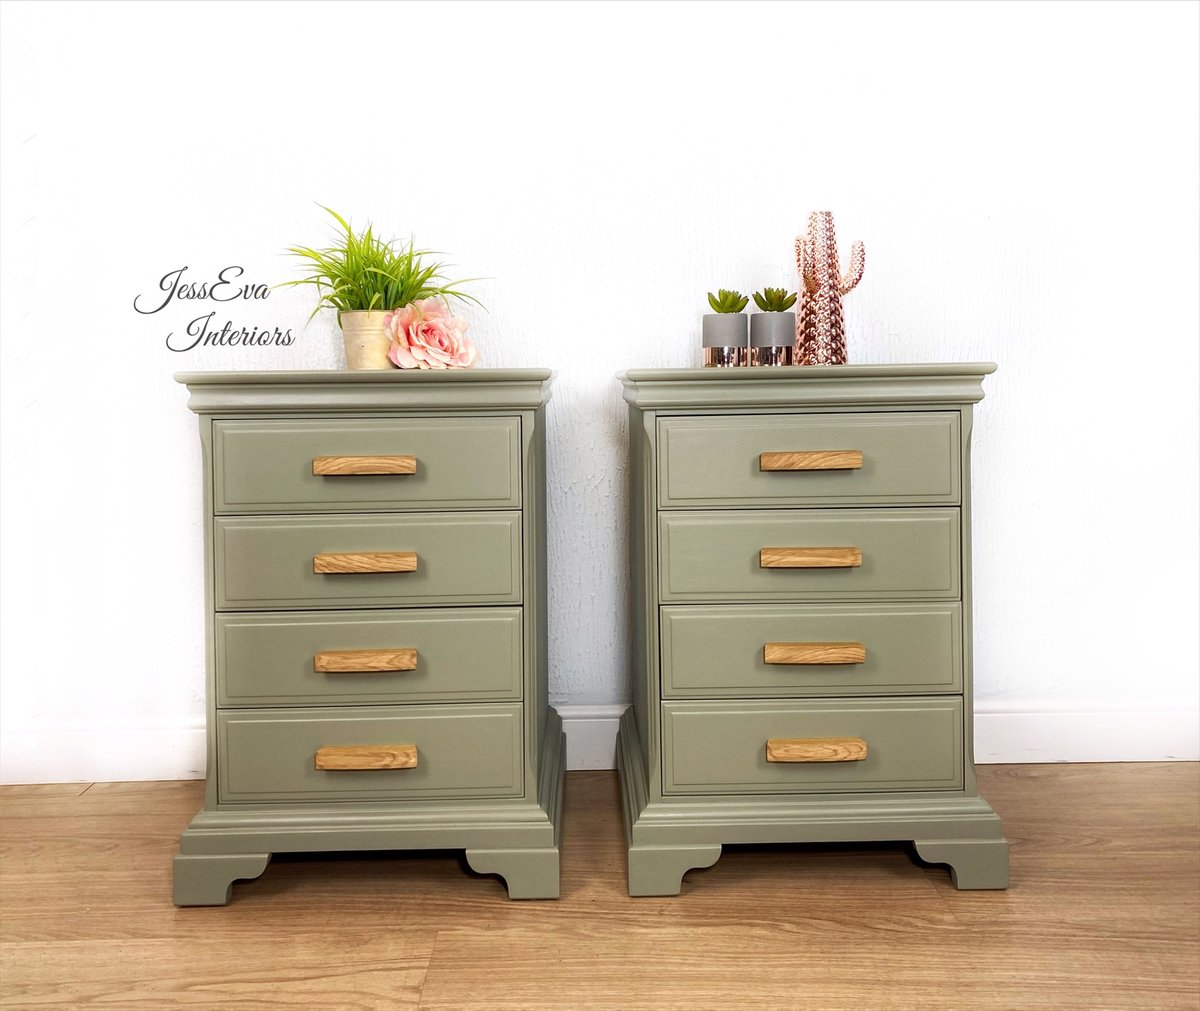 Painted light green Stag Bedside Tables Bedside Cabinets in Boho style 